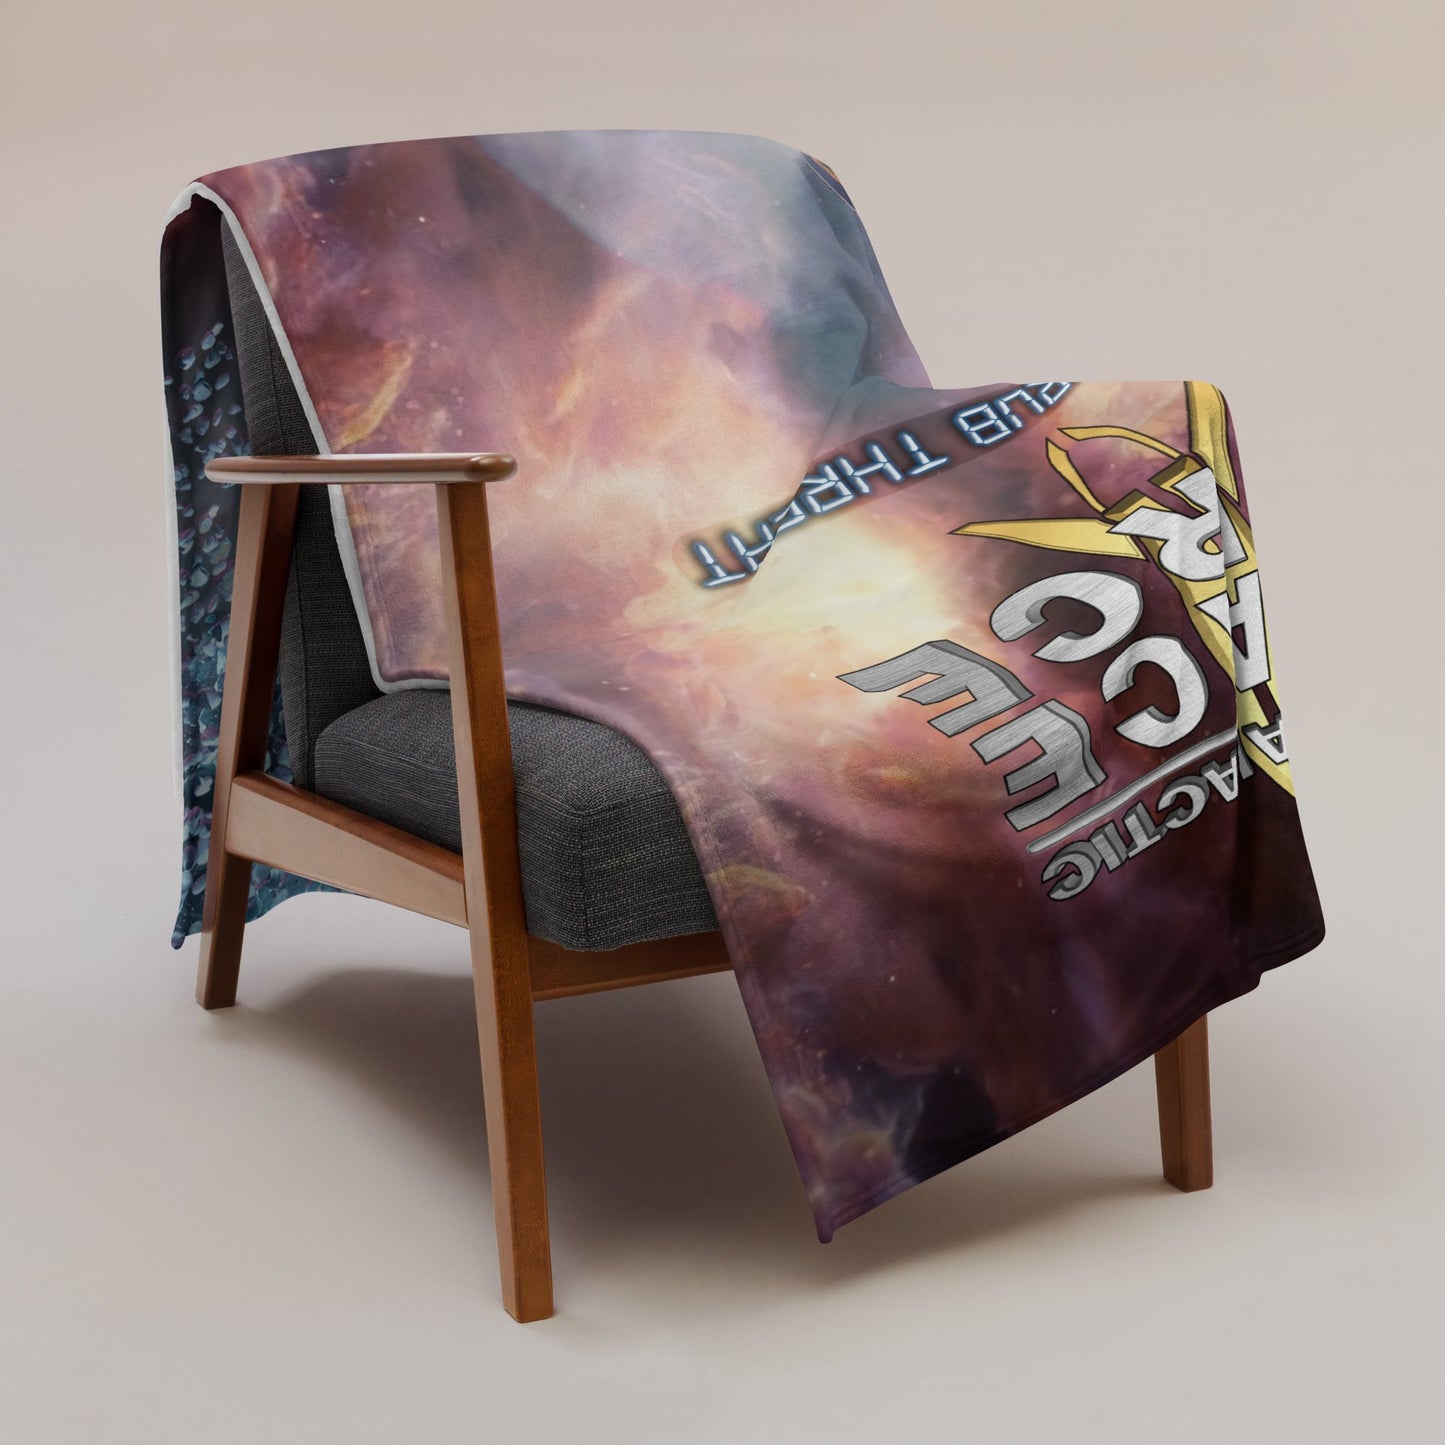 Intergalactic Space Force 2 | The Cherub Threat Throw Blanket - Wrap Yourself in Cosmic Comedy - Spectral Ink Shop - Blanket -3156348_10986